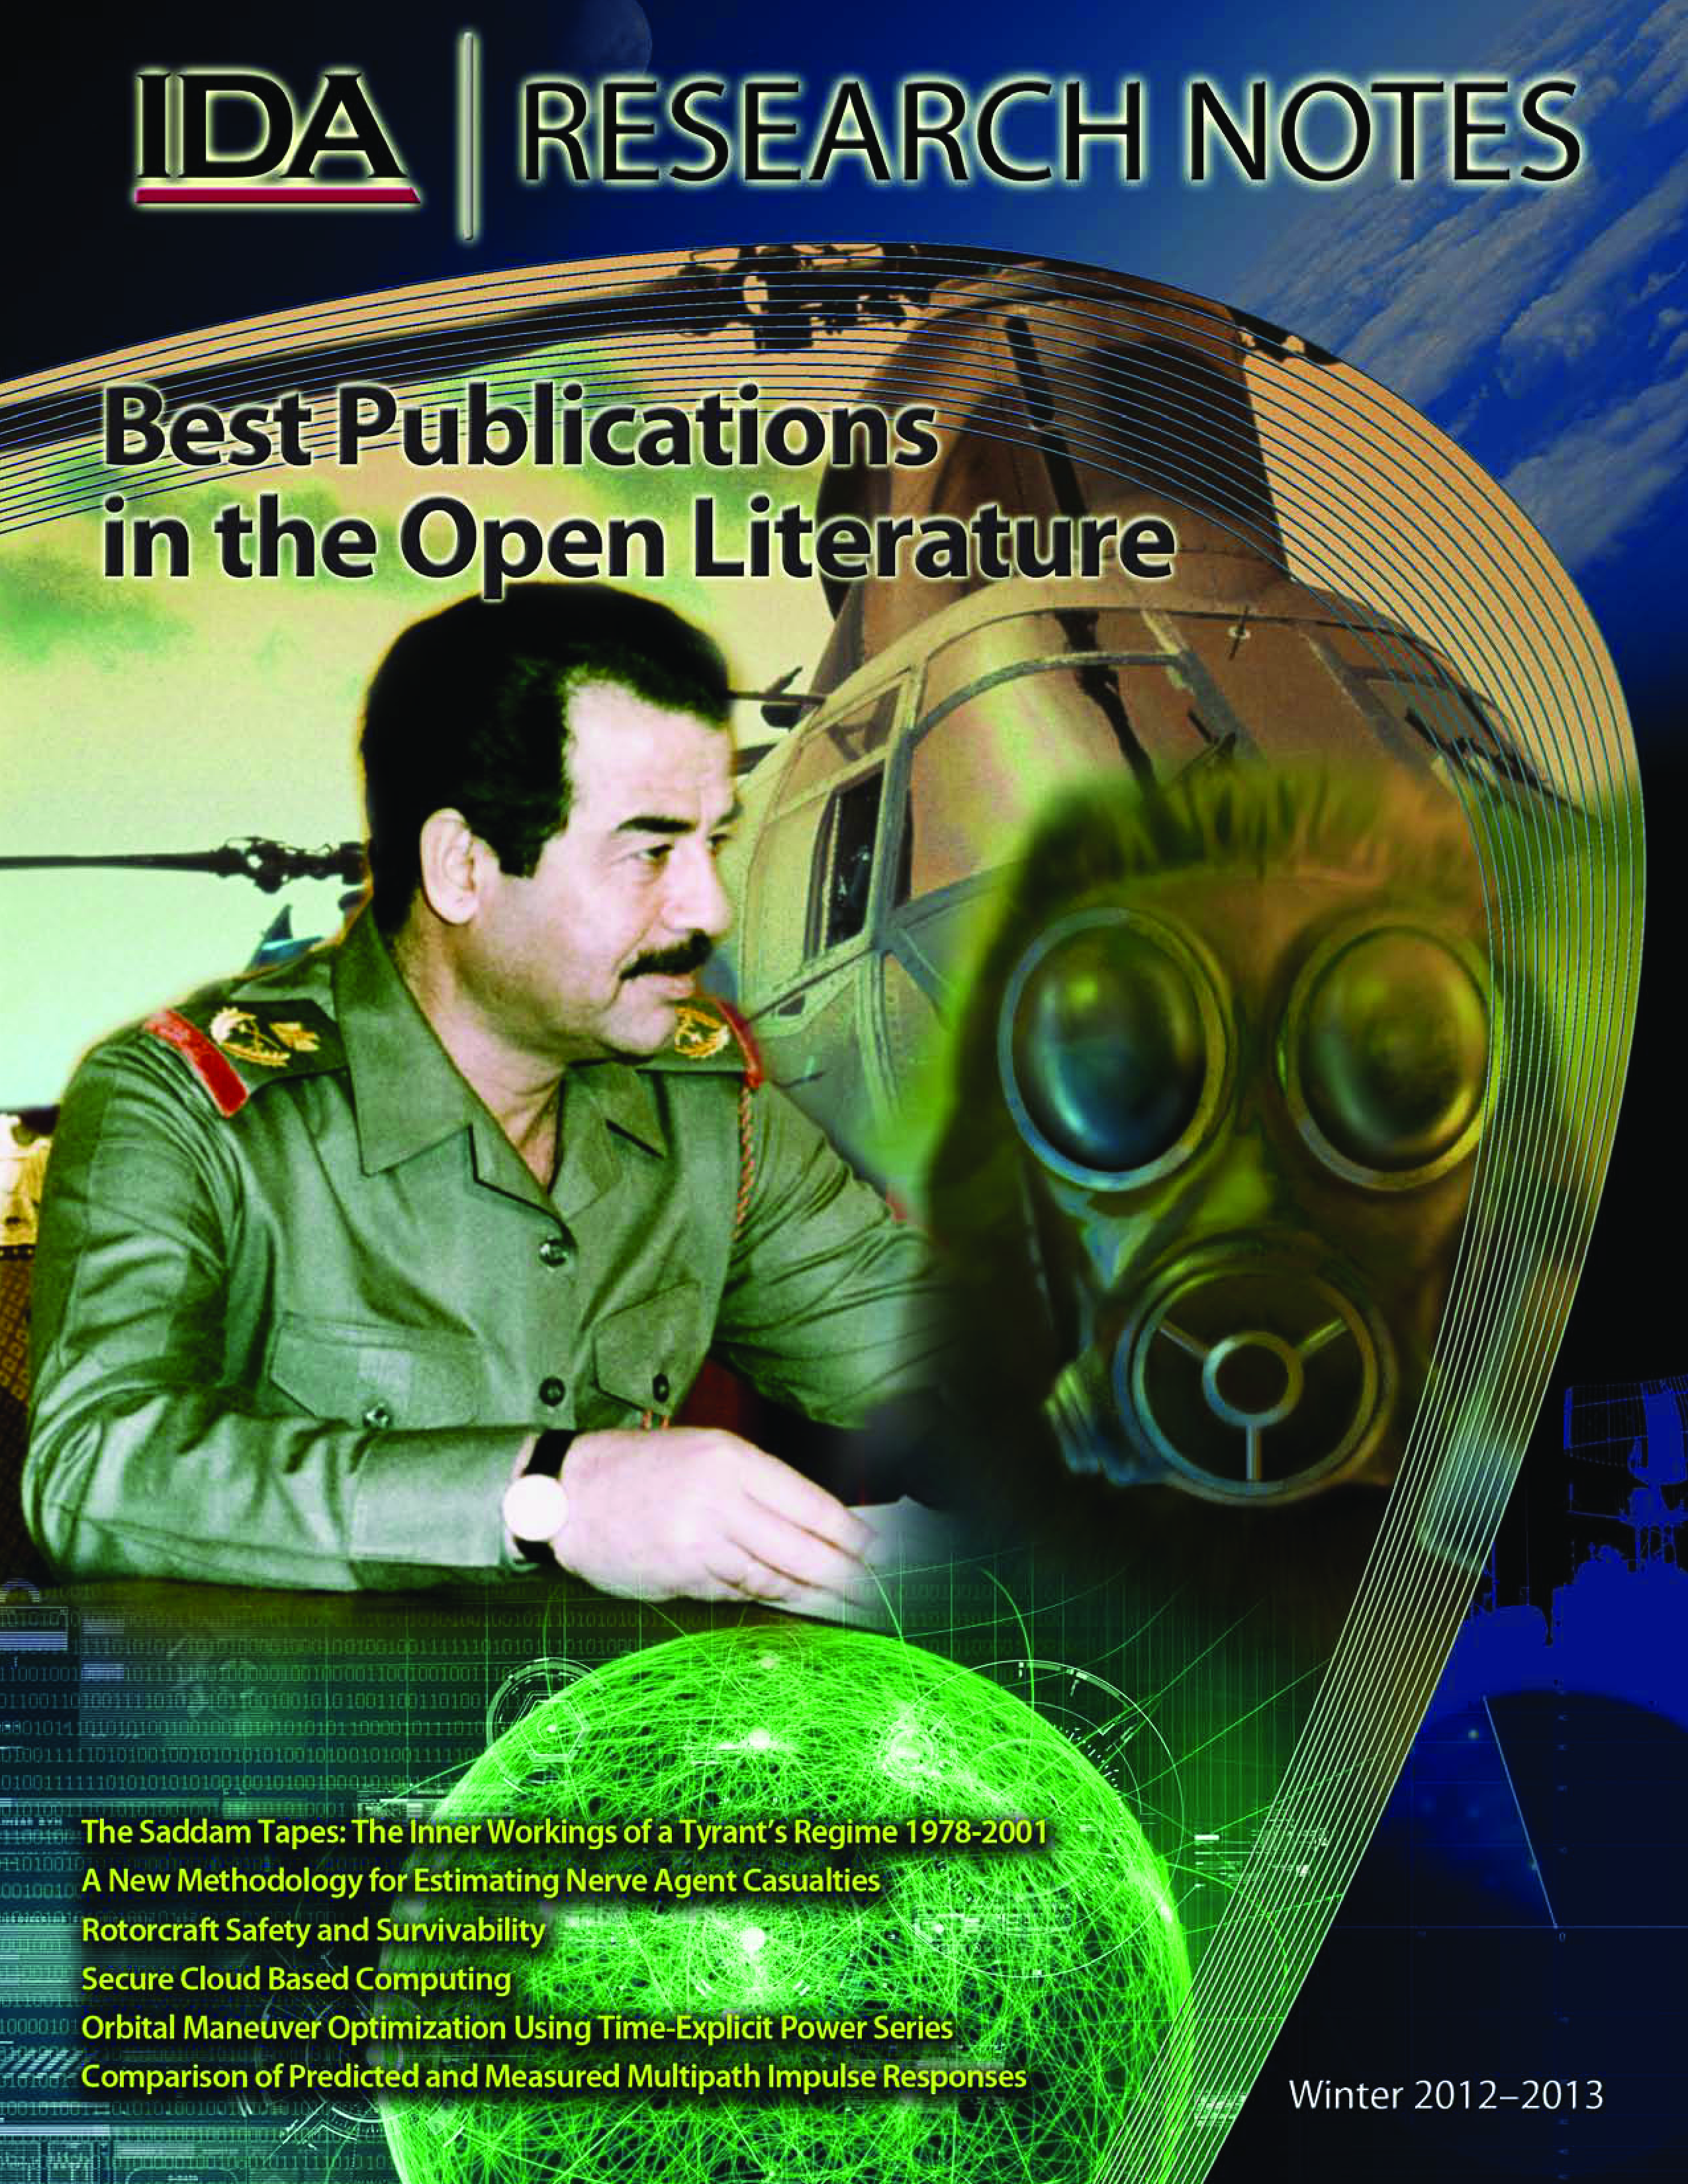 IDA Research Notes Winter, 2012-2013 Best Publications in Literature